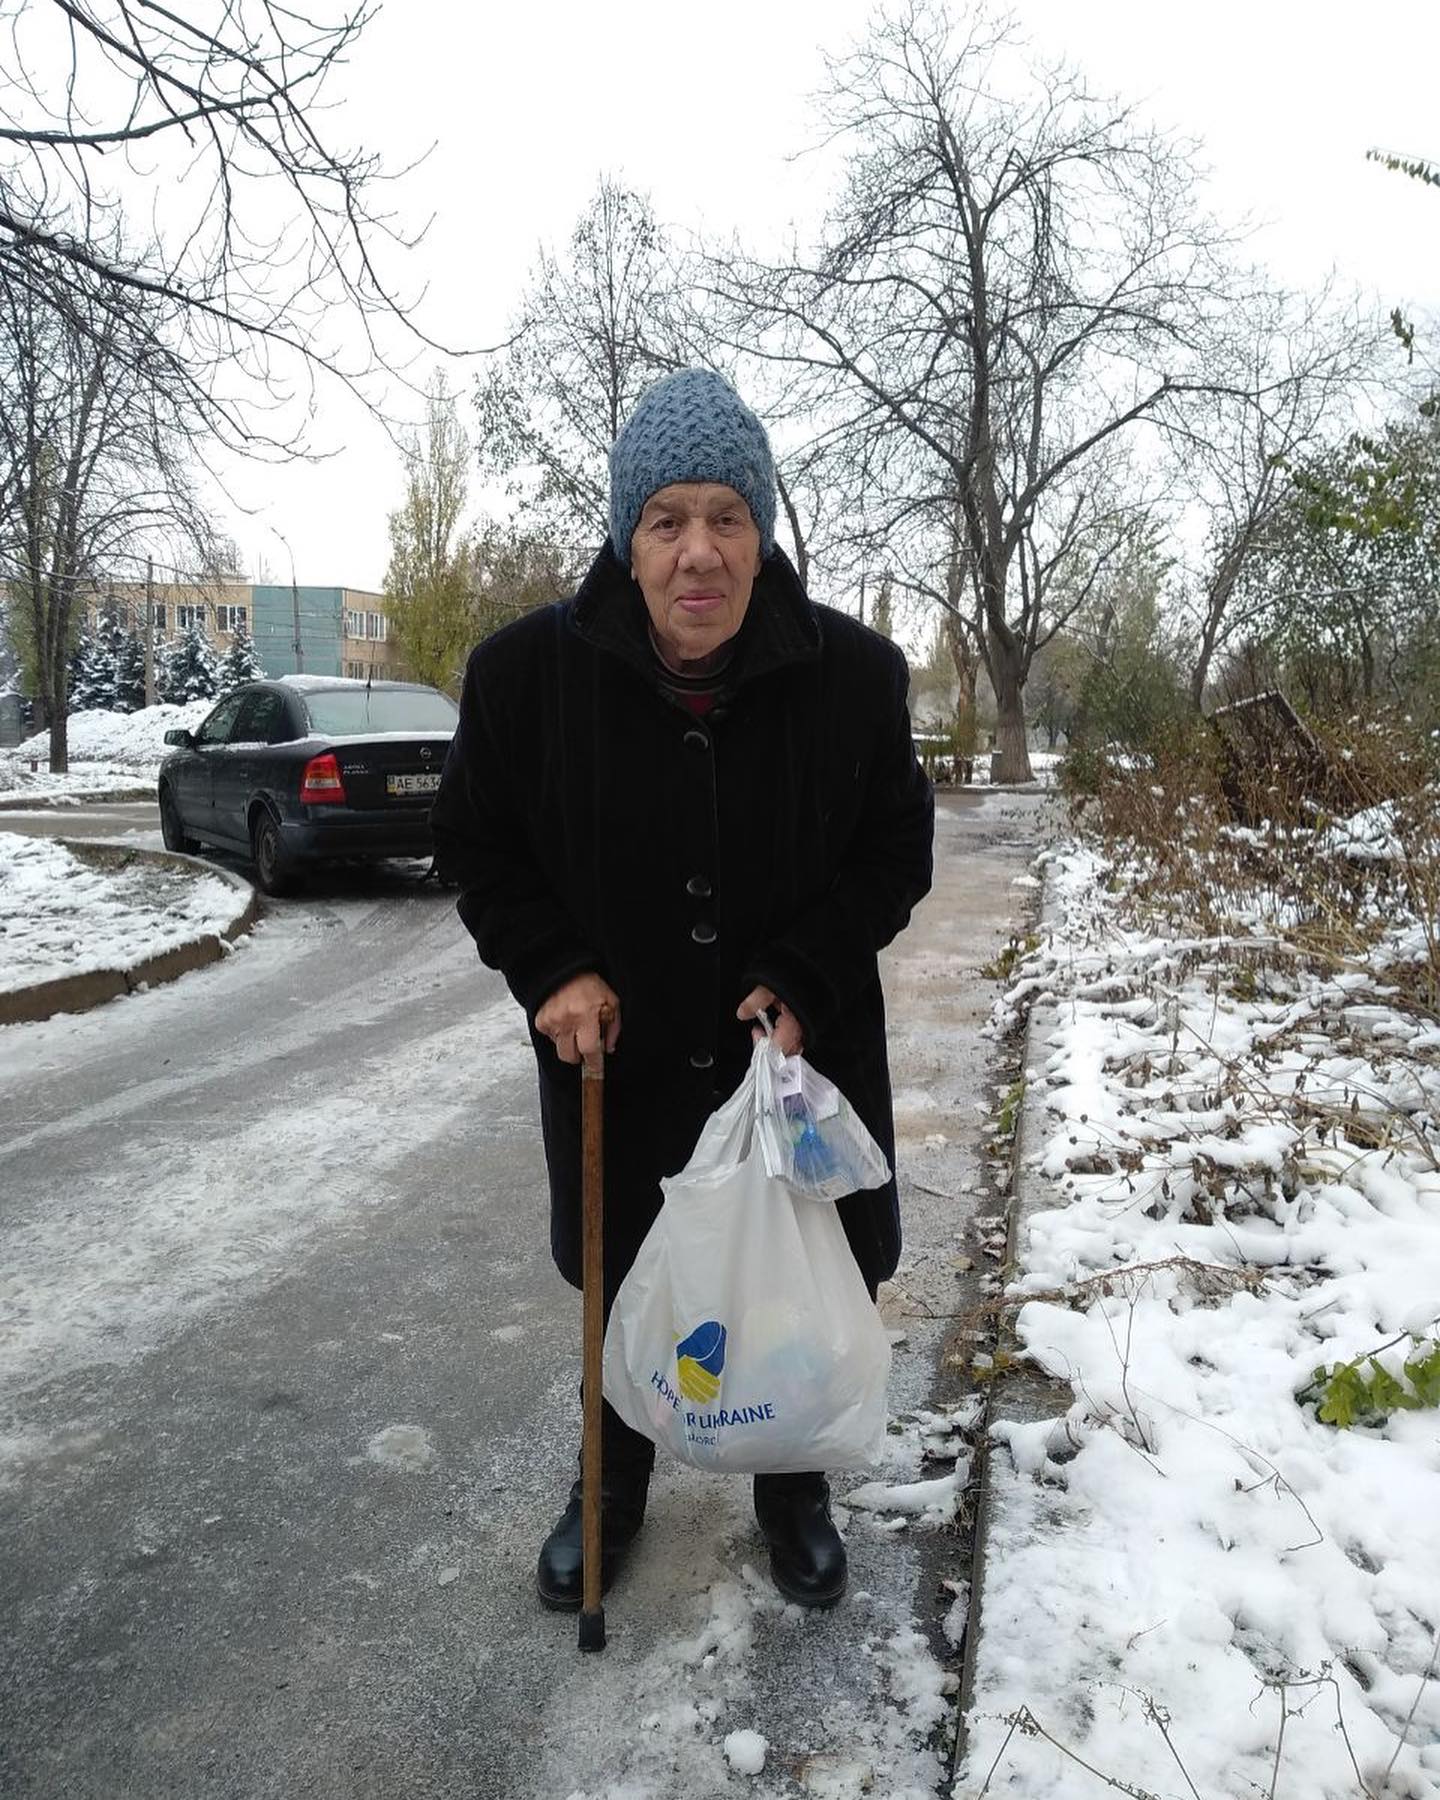 A man holding a bag of groceries in the snow.